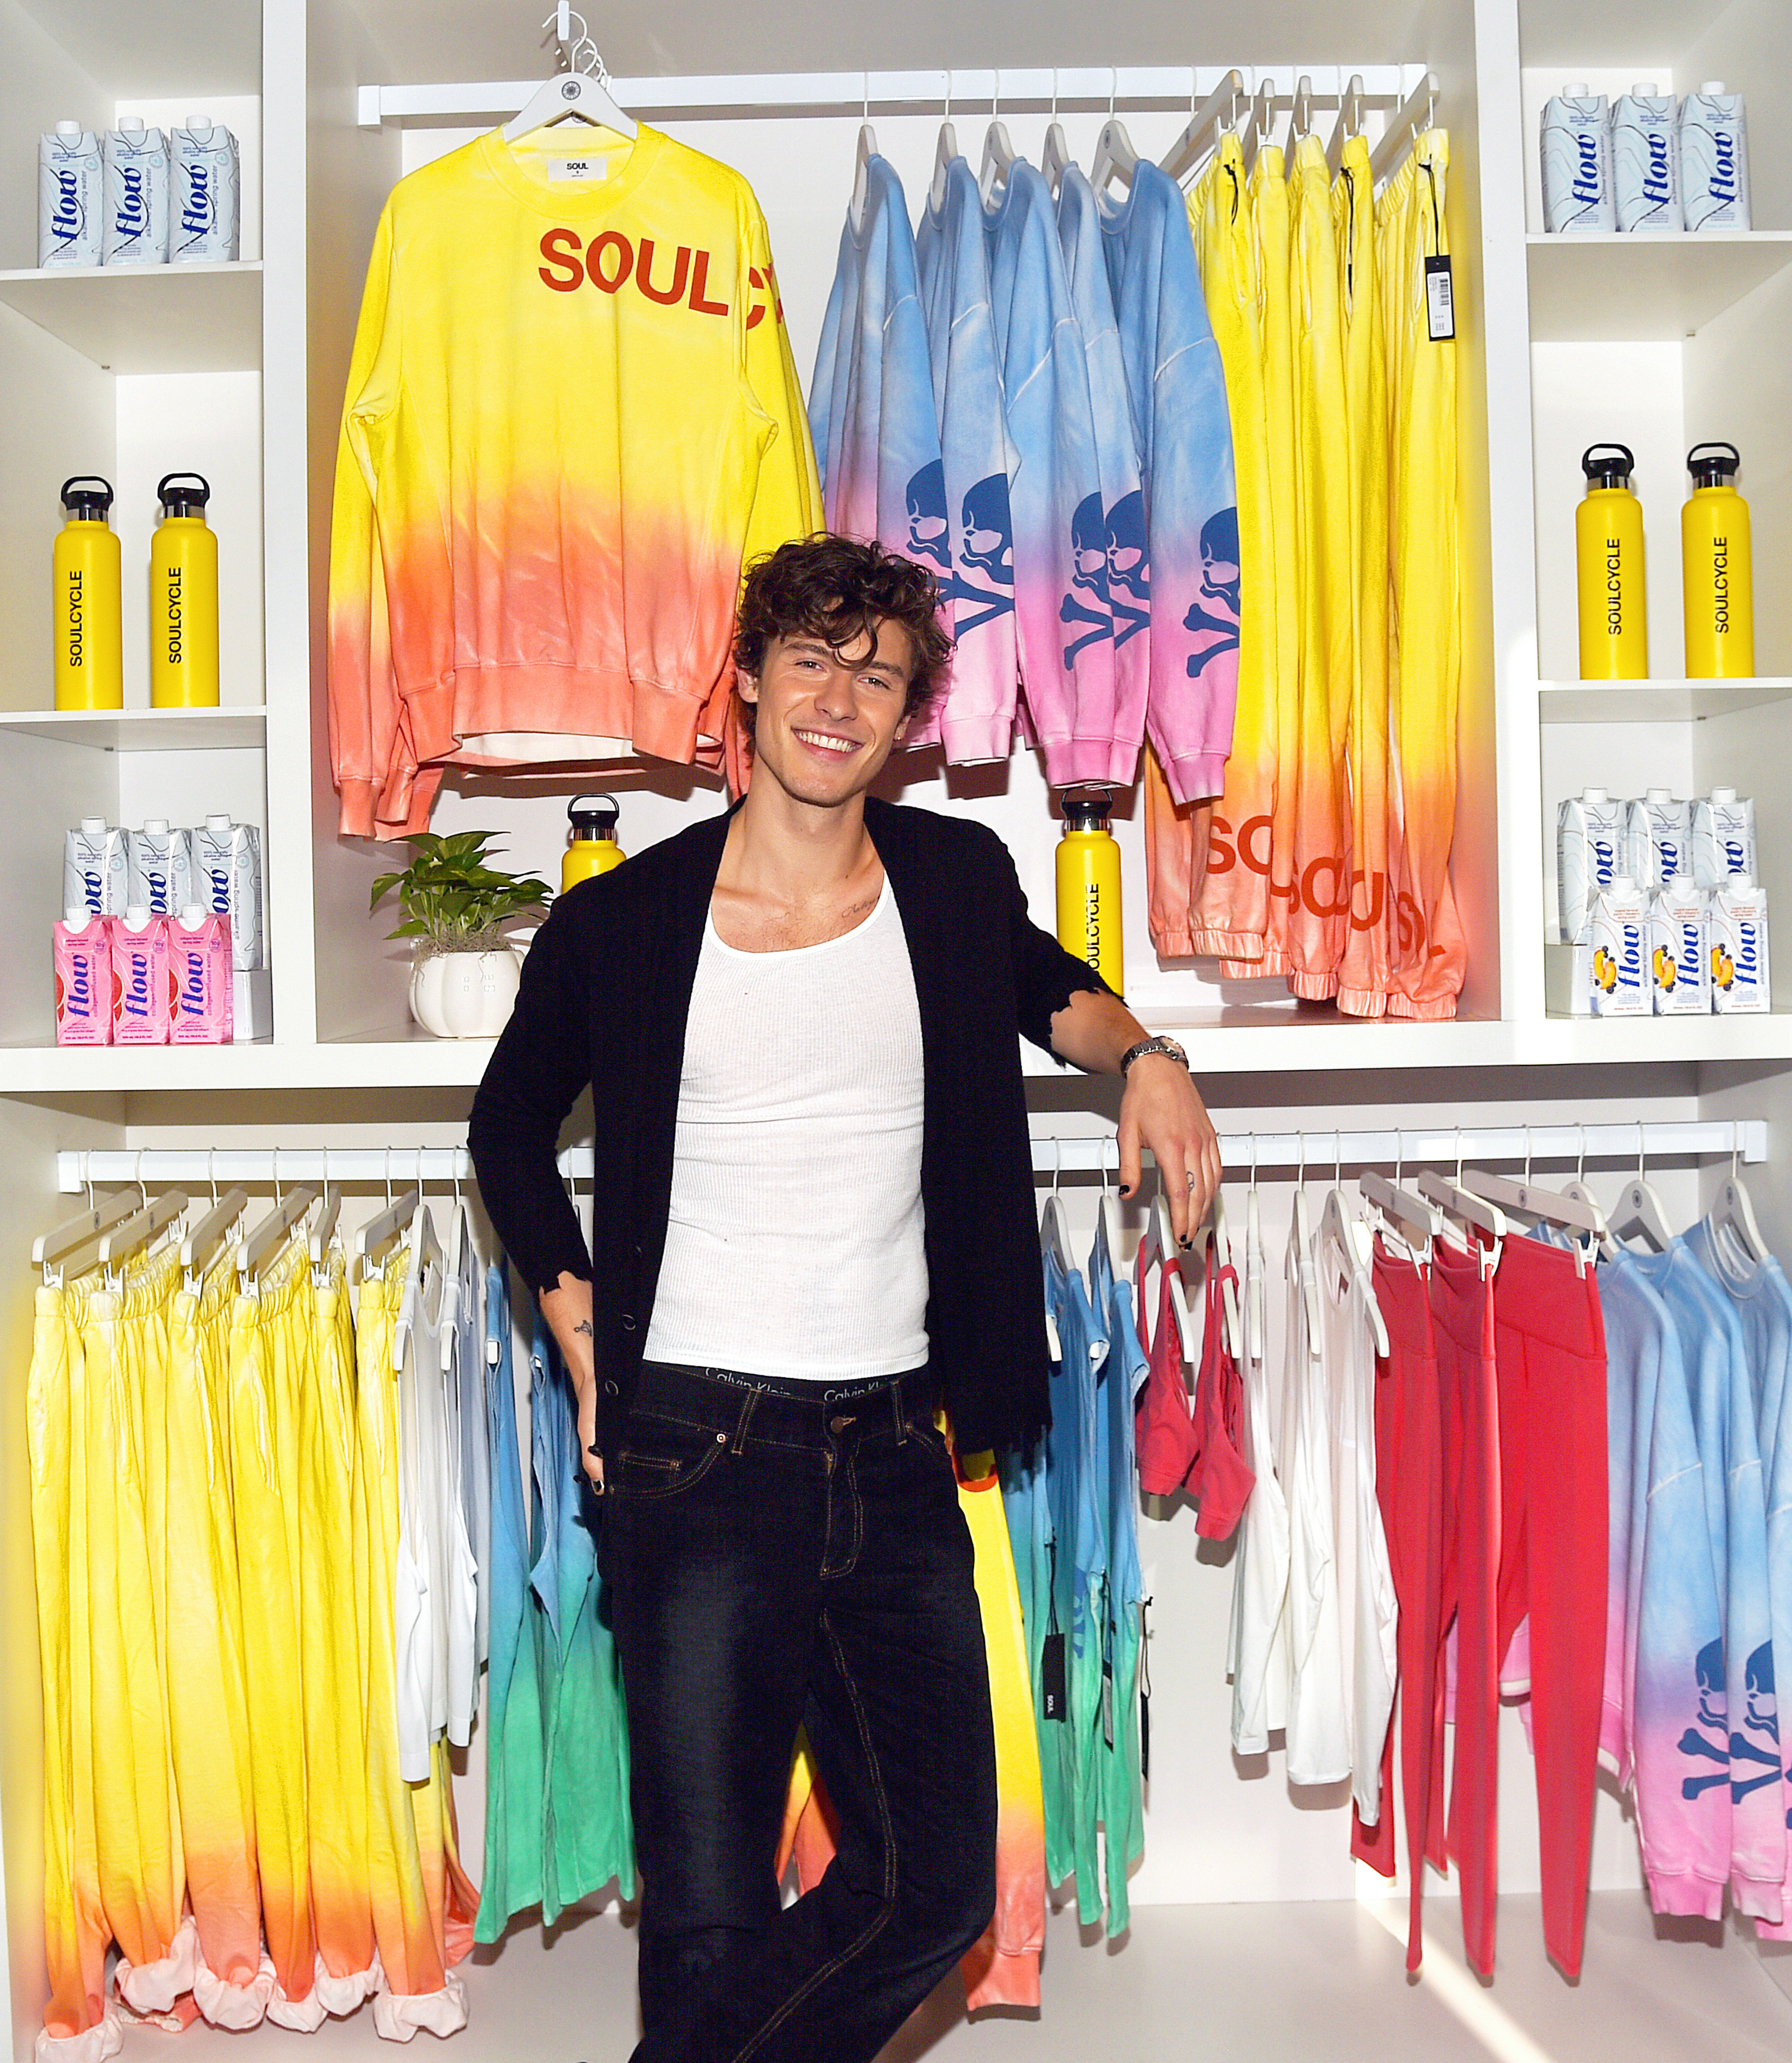 Mendes poses for a photo in front of a colorful set of clothes